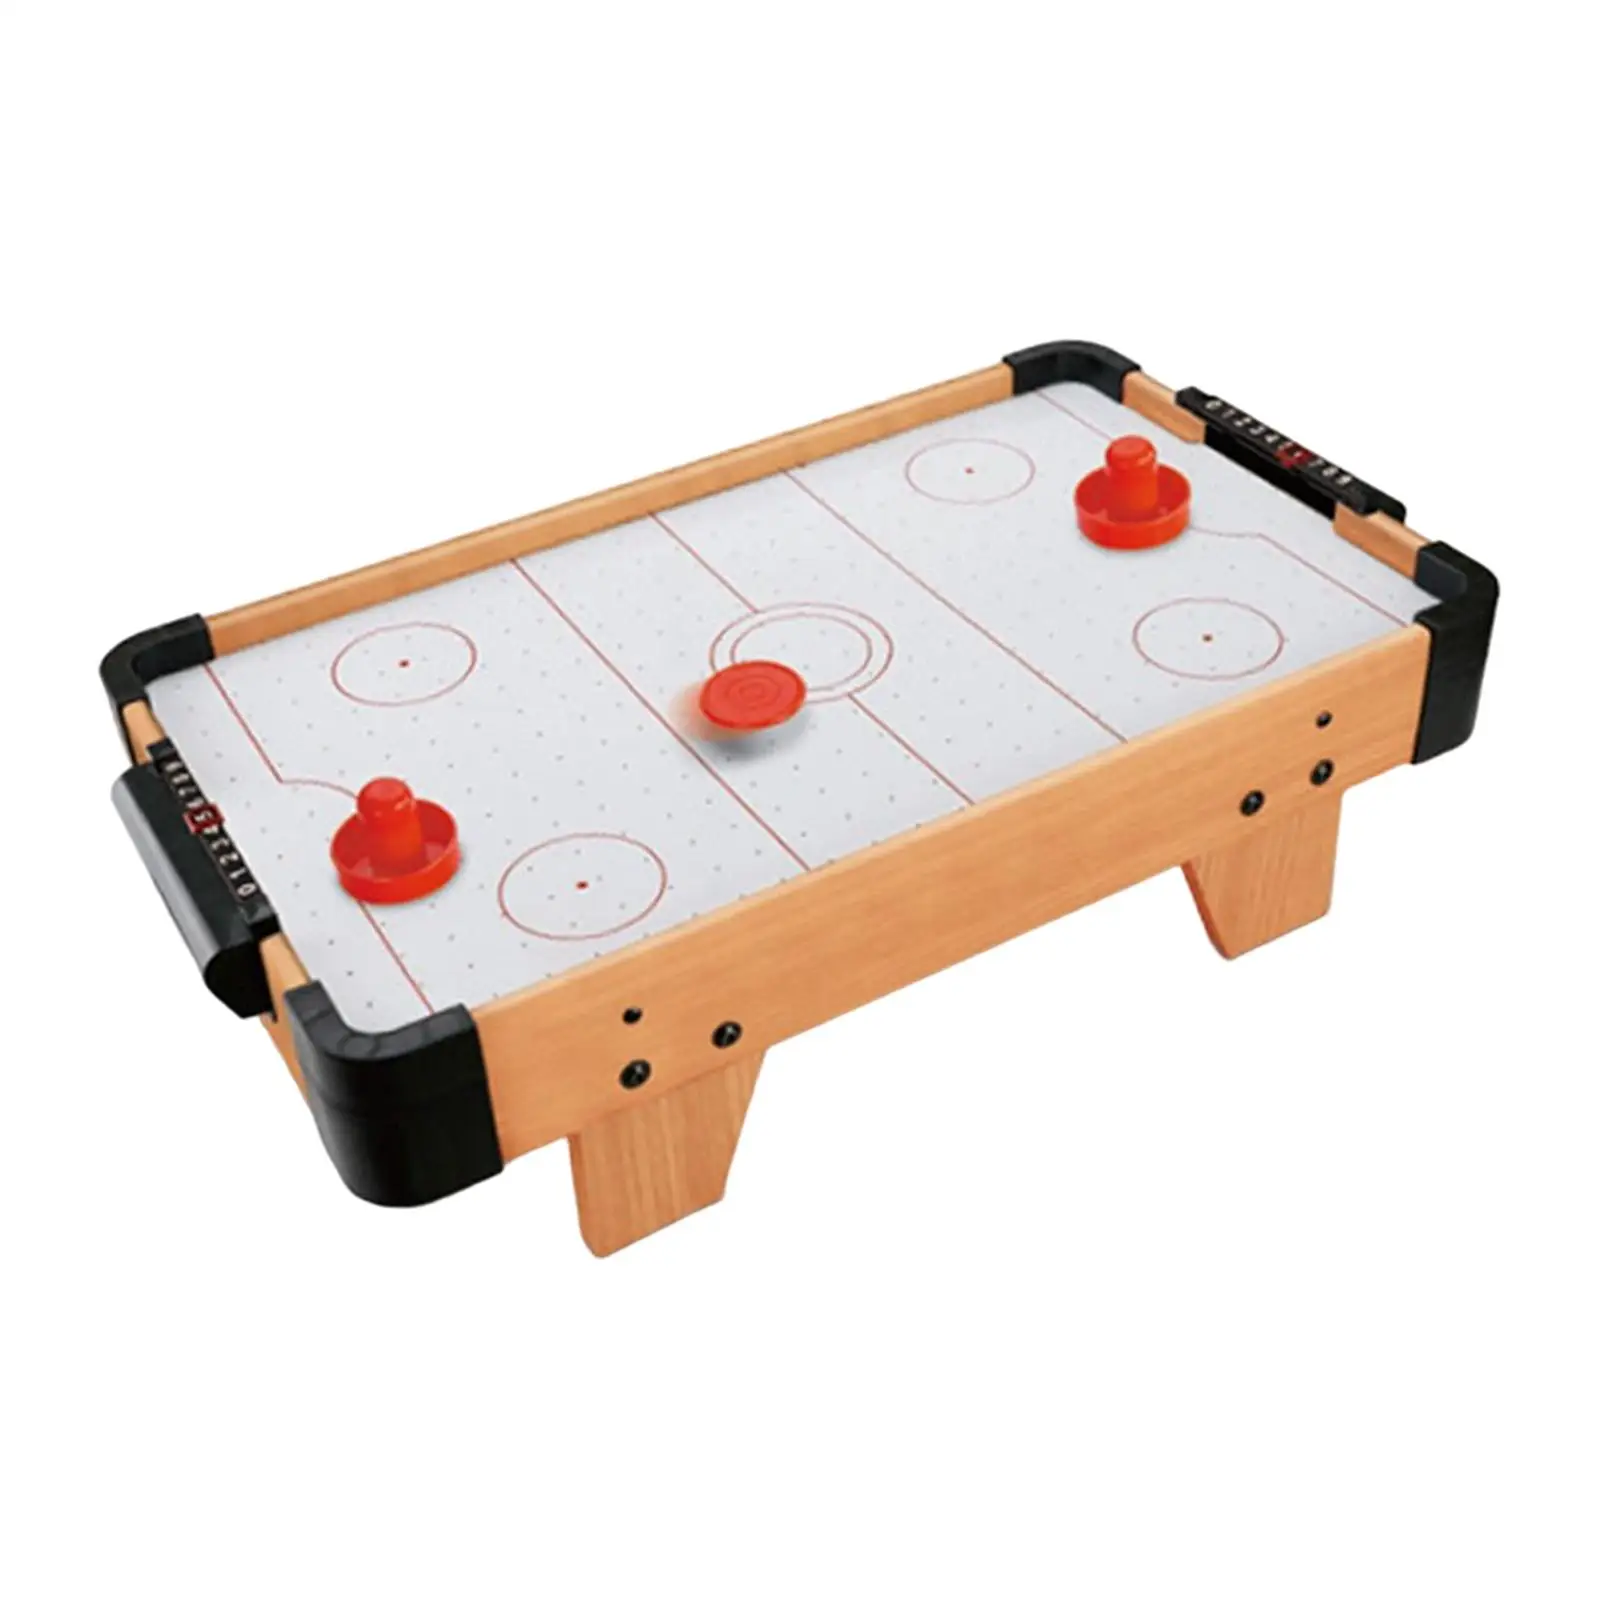 Air Hockey Table Paced Winner Board Game with Sliders and Pucks Parent Child Interactive Desktop Playing Field for Children Kids